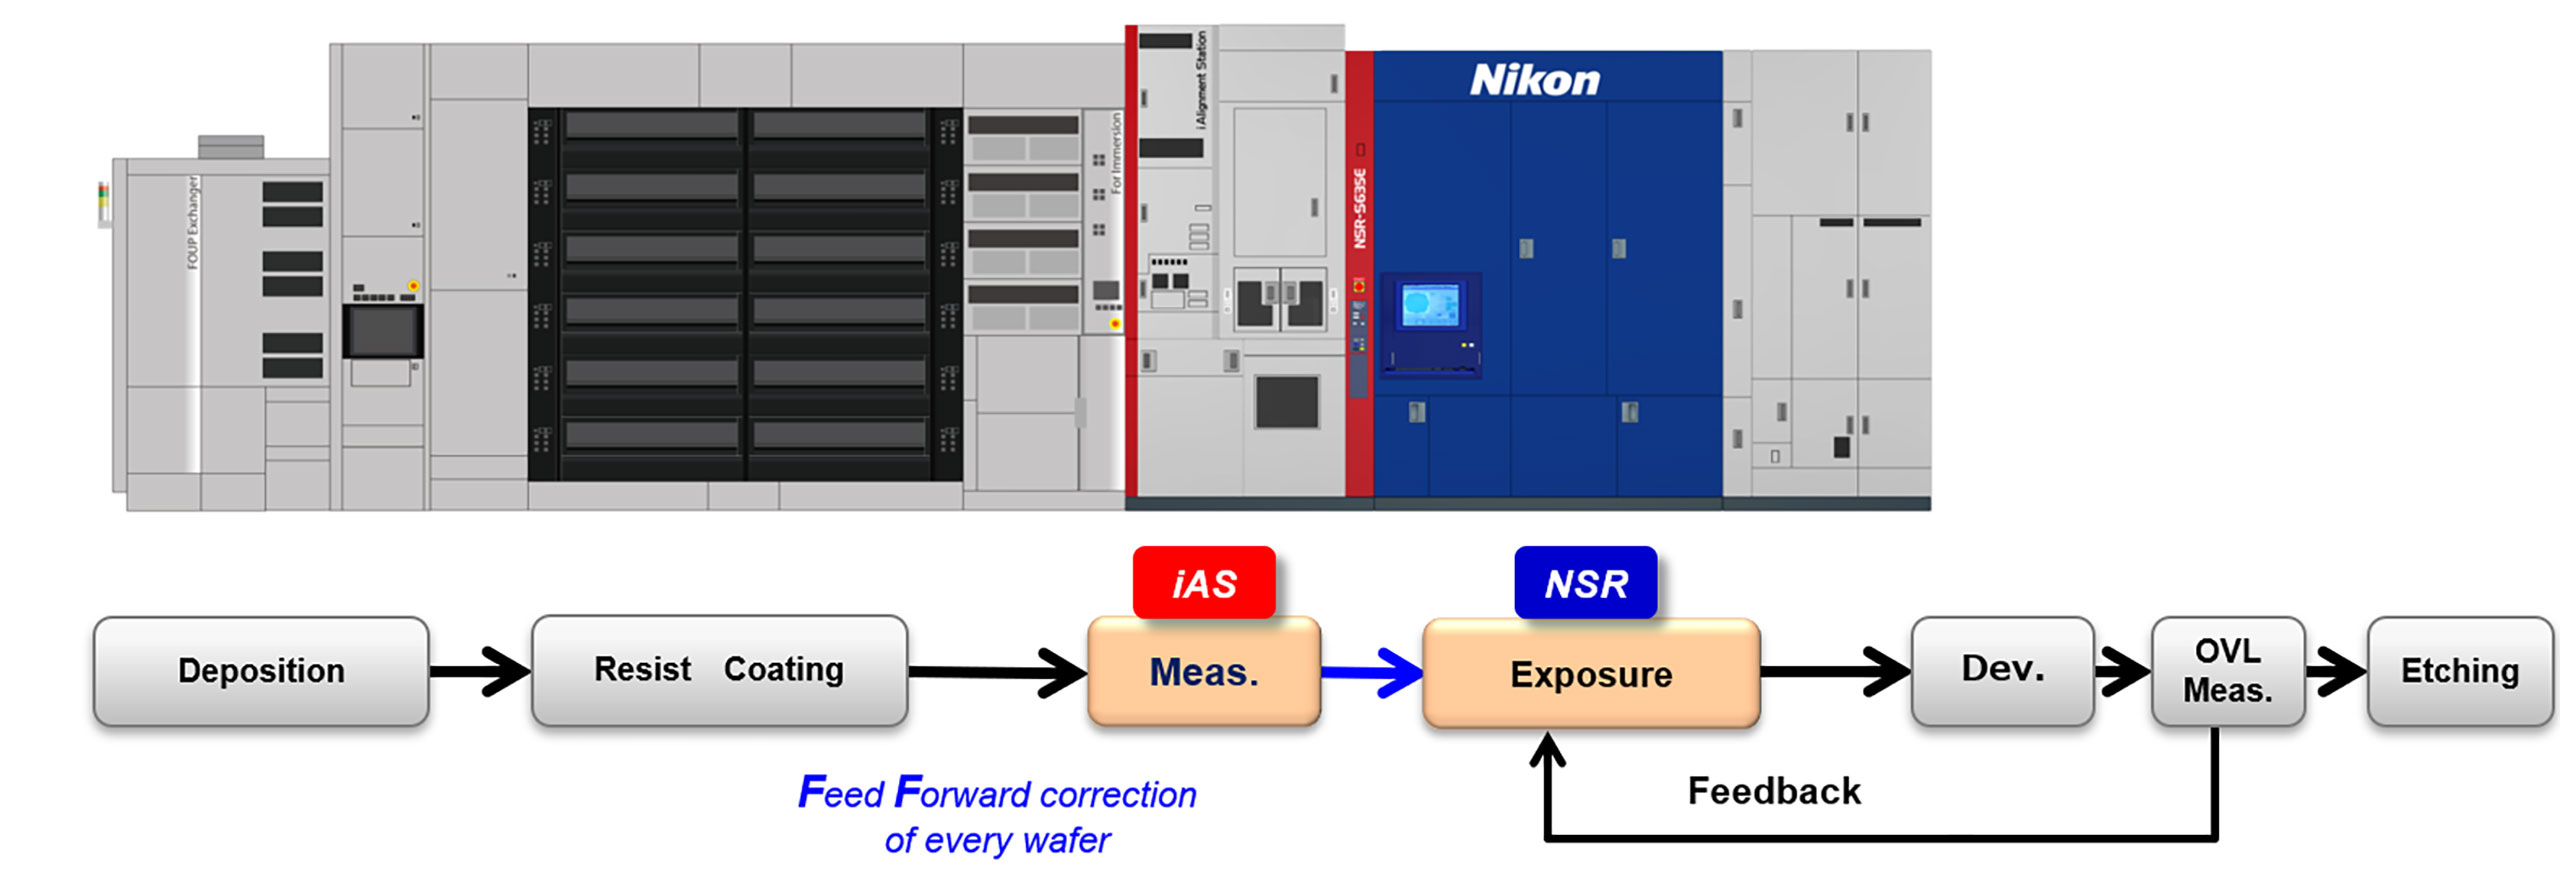 Explanatory diagram of silicon wafer processing from deposition and resist coating to exposure, overlay measurement and etching. Regarding NSR-S635E, the inline Alignment Station (iAS) measures absolute grid distortion values for all wafers prior to exposure and feeds forward correction values to the lithography system.